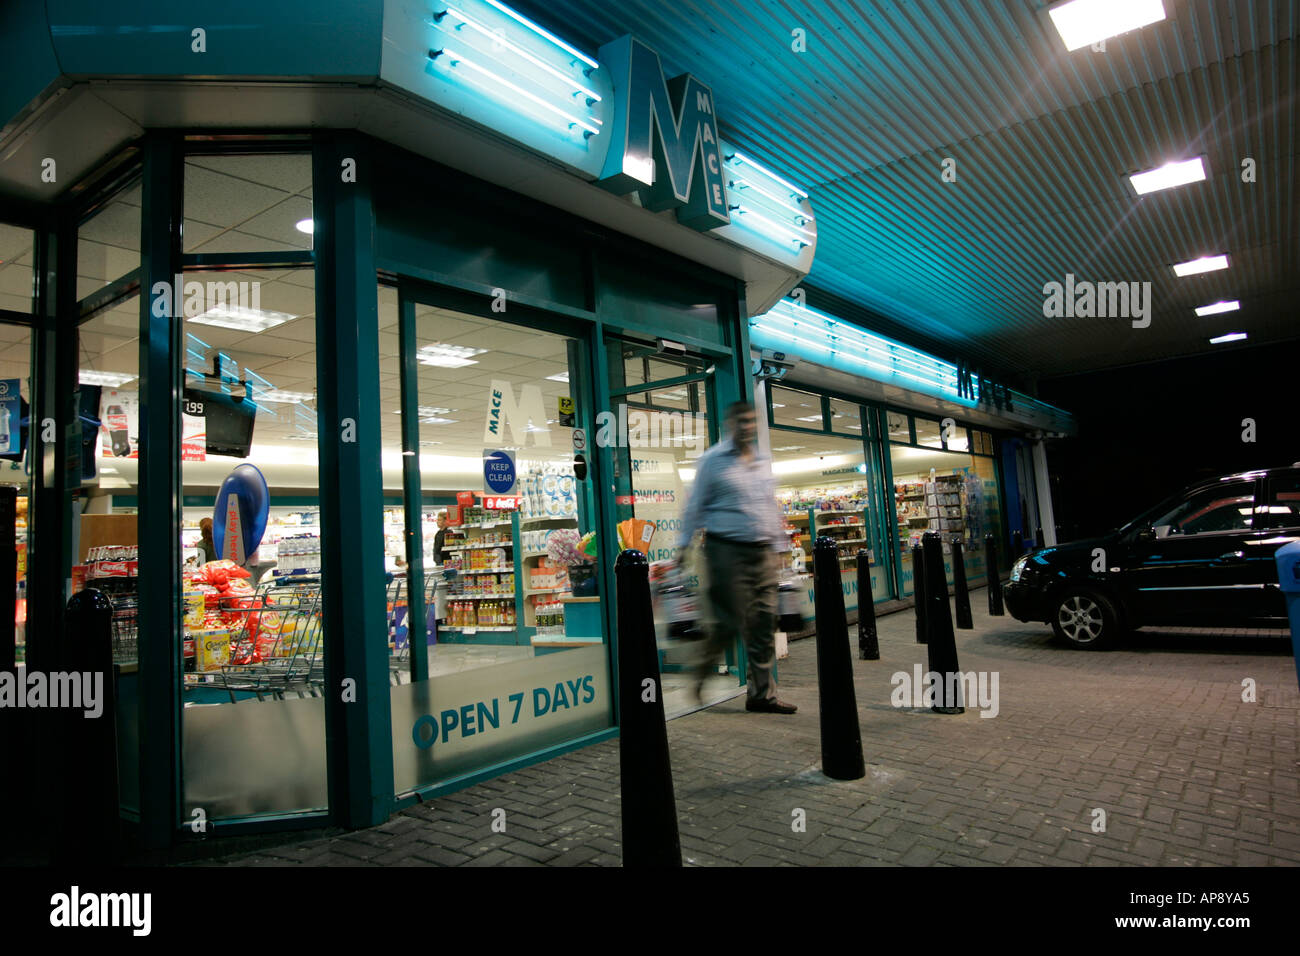 Mace shopping market in a petrol station garage forecourt at night with customer leaving northern ireland Stock Photo